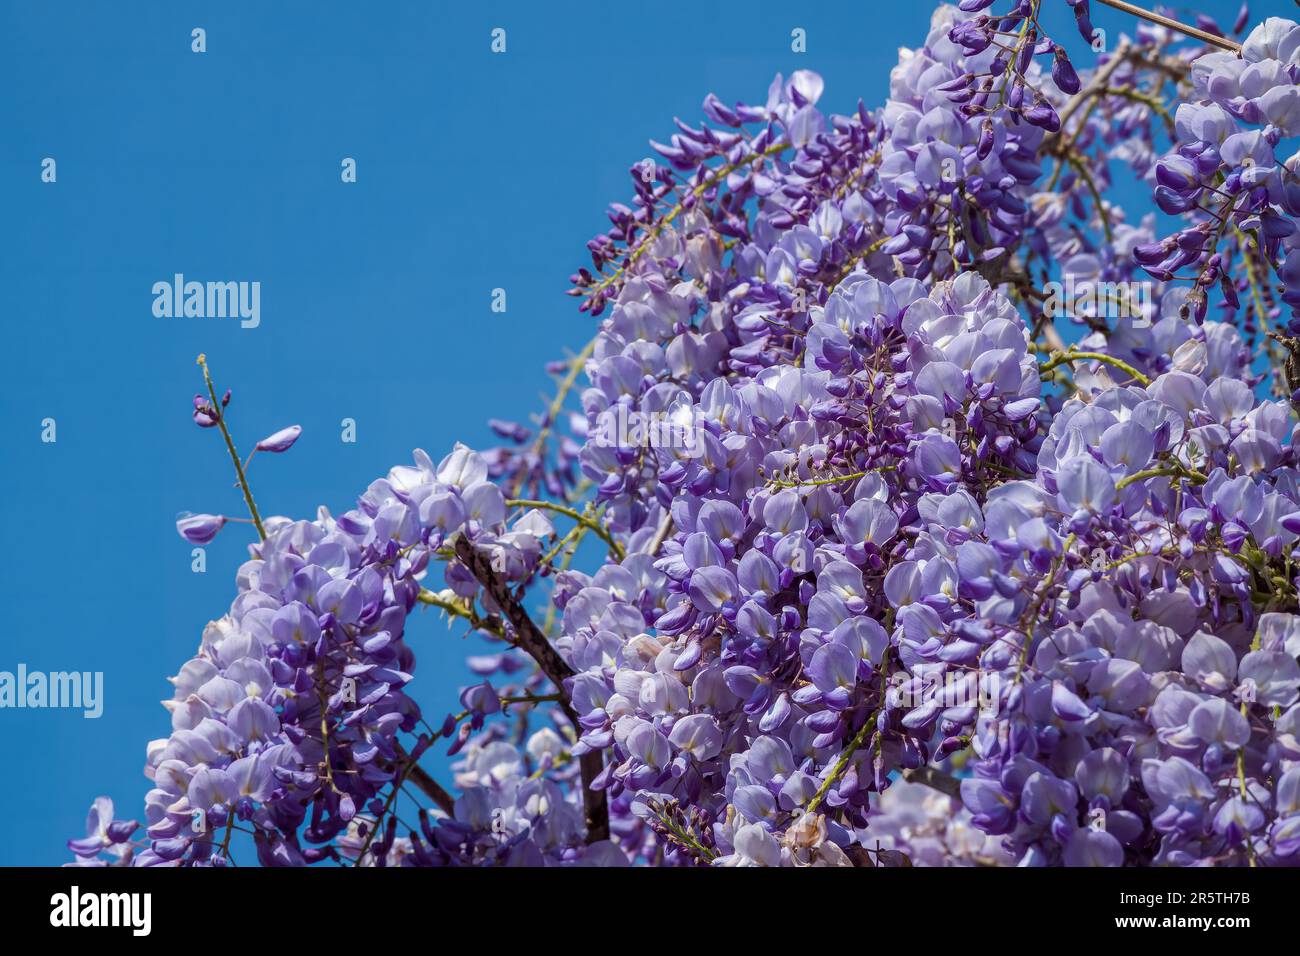 close up of flowering wisteria a beautiful prolific tree with scented purple flowers in hanging racemes with blue sky in the background Stock Photo